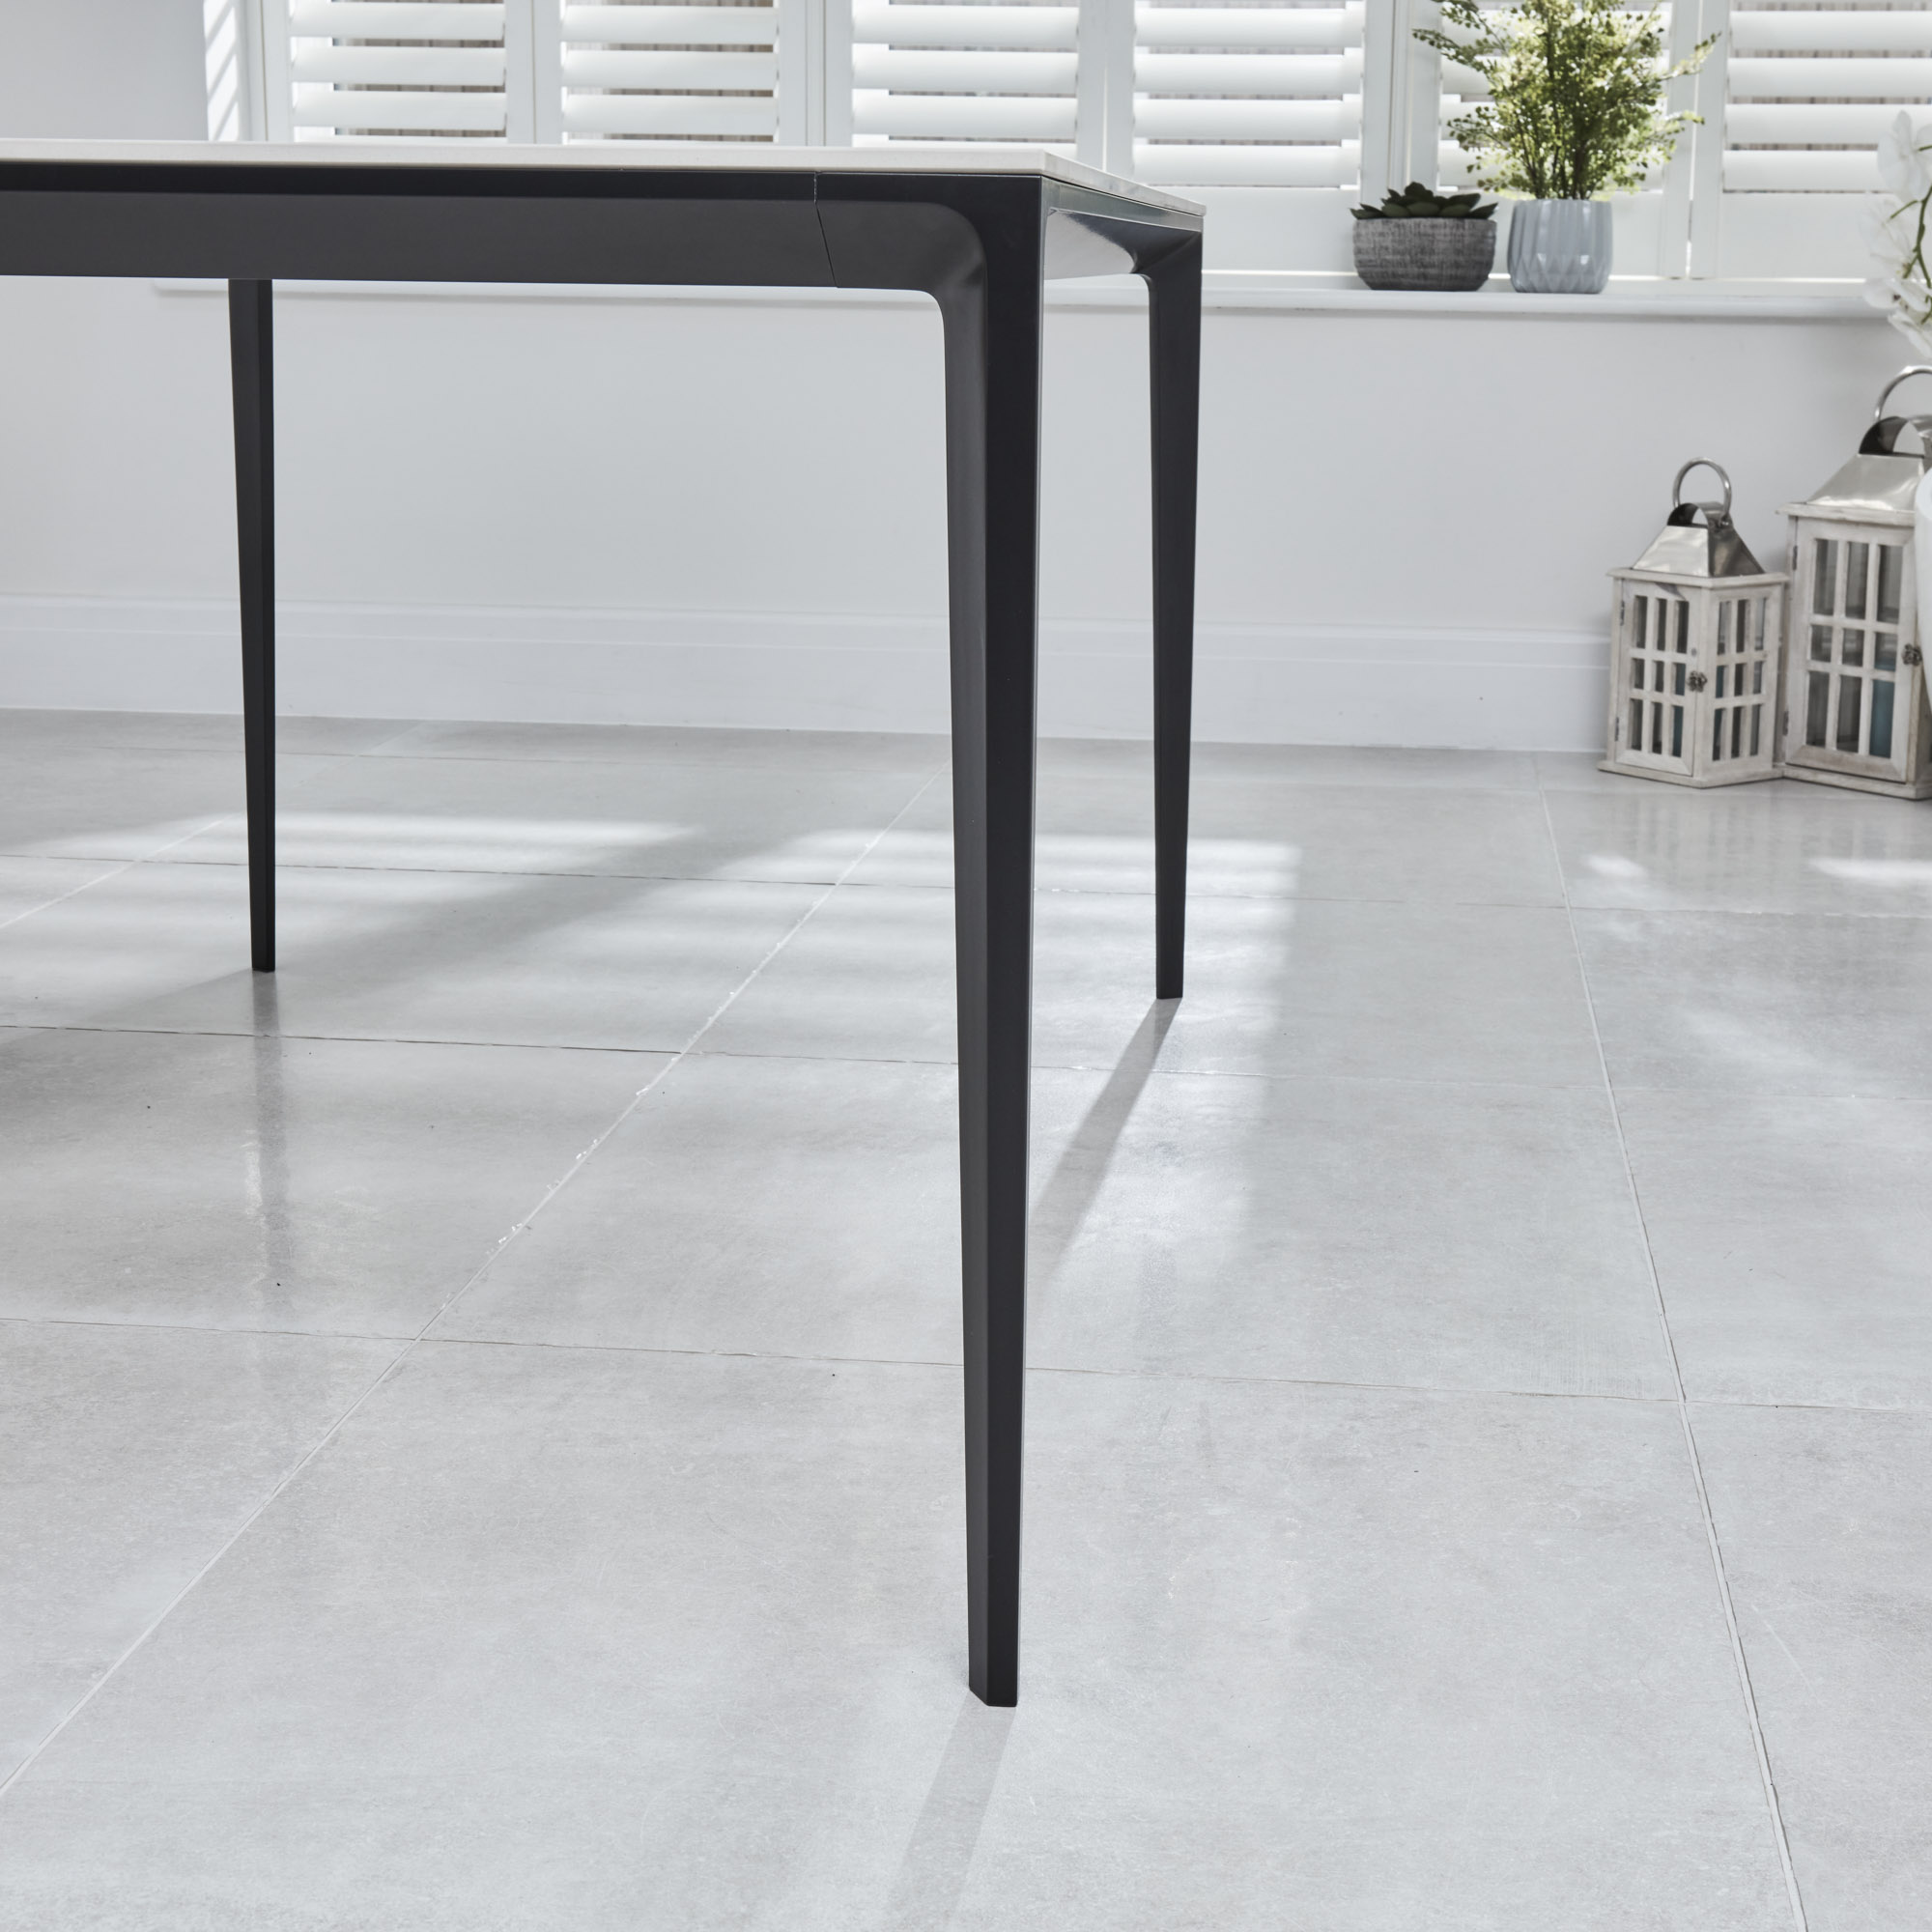 Bellagio 160cm White Sintered Stone Dining Table with Black Contemporary Base (Copy)